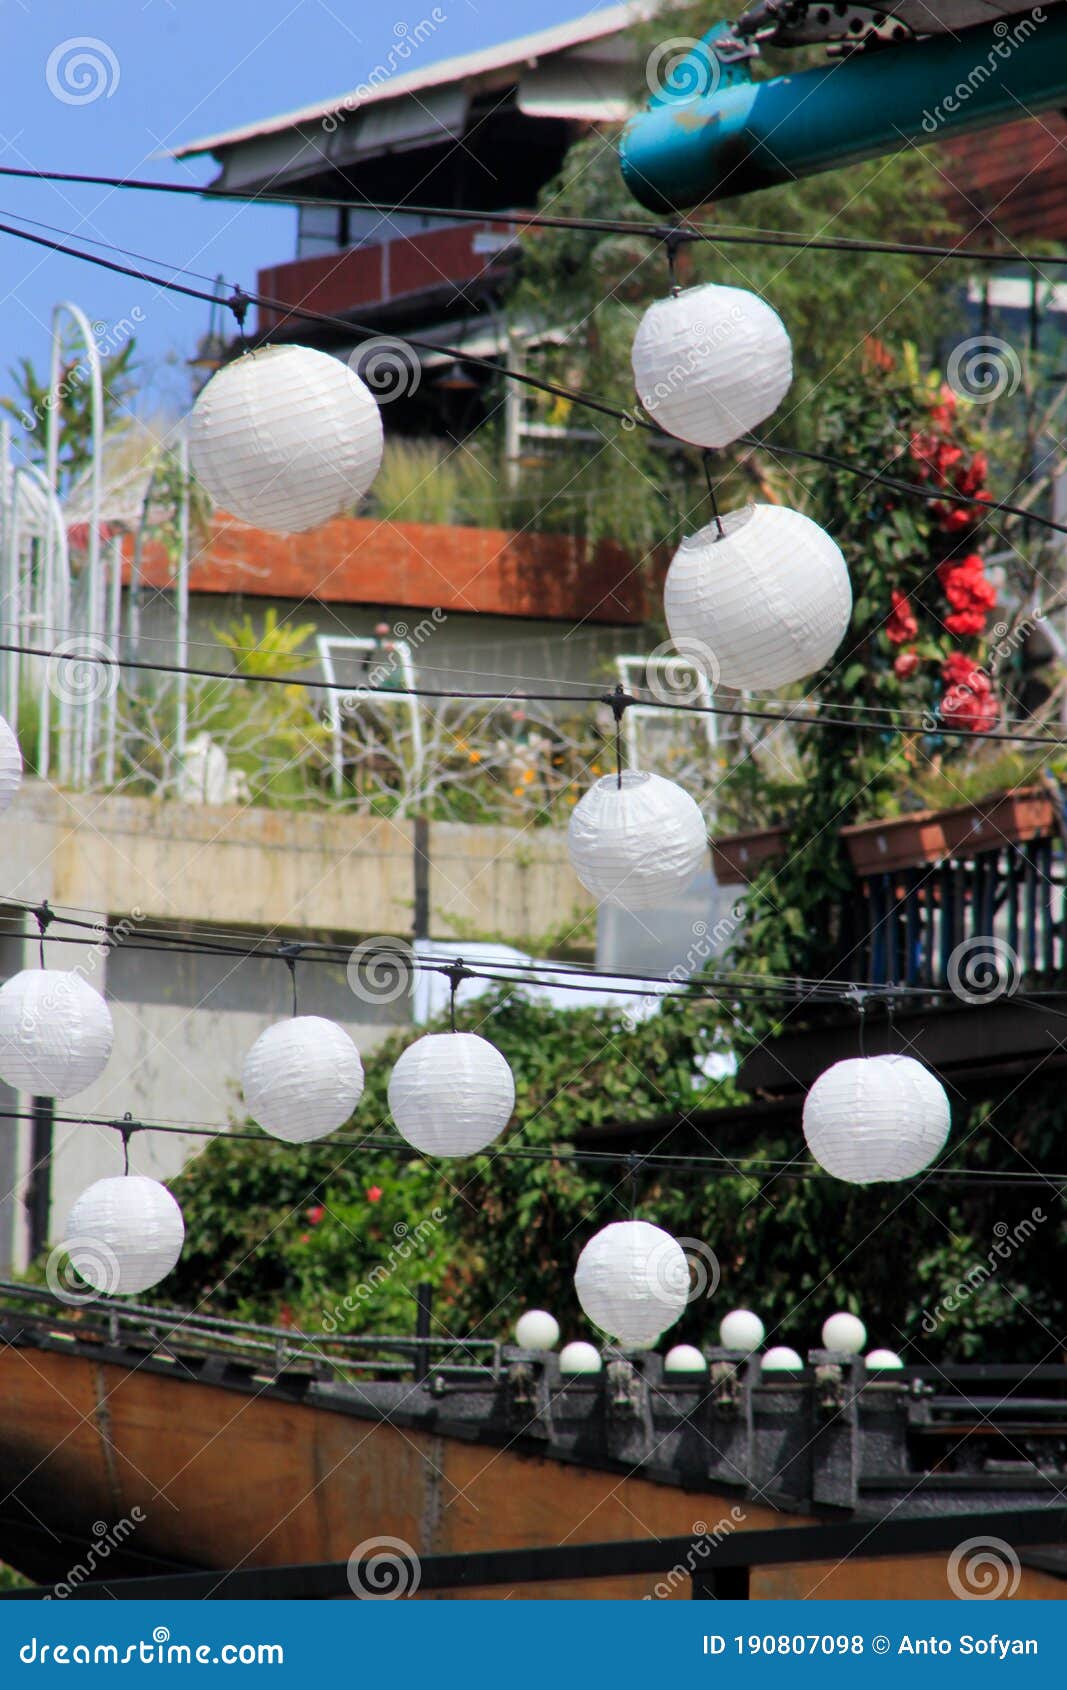 white lantern decoration in punclut tourism place bandung, indonesia